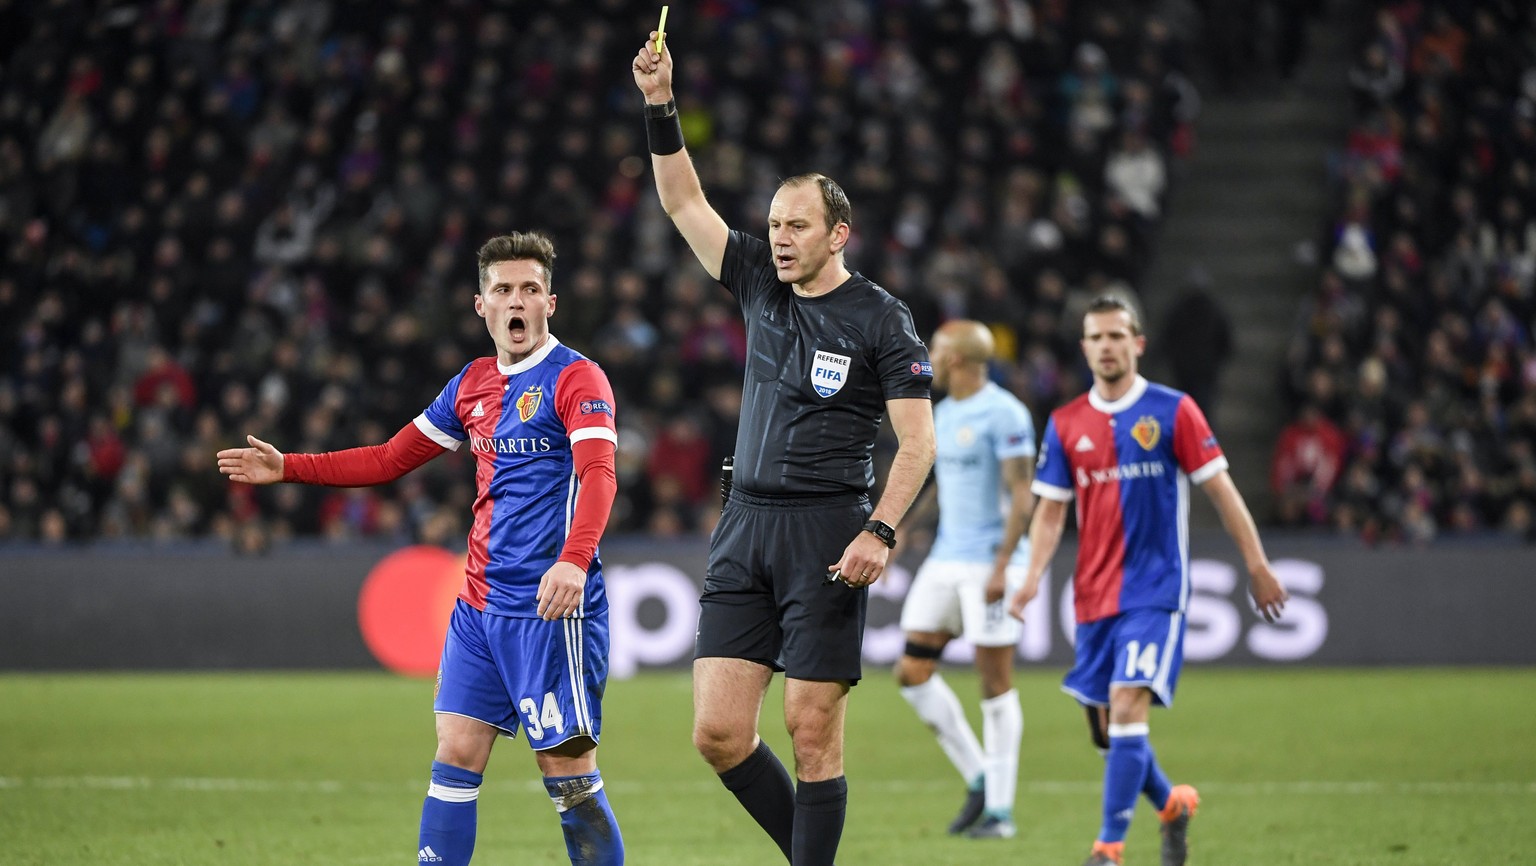 epa06522346 Referee Jonas Eriksson from Sweden (C) shows the yellow card to Basel&#039;s Taulant Xhaka (L) during the UEFA Champions League round of 16 first leg soccer match between FC Basel and Manc ...